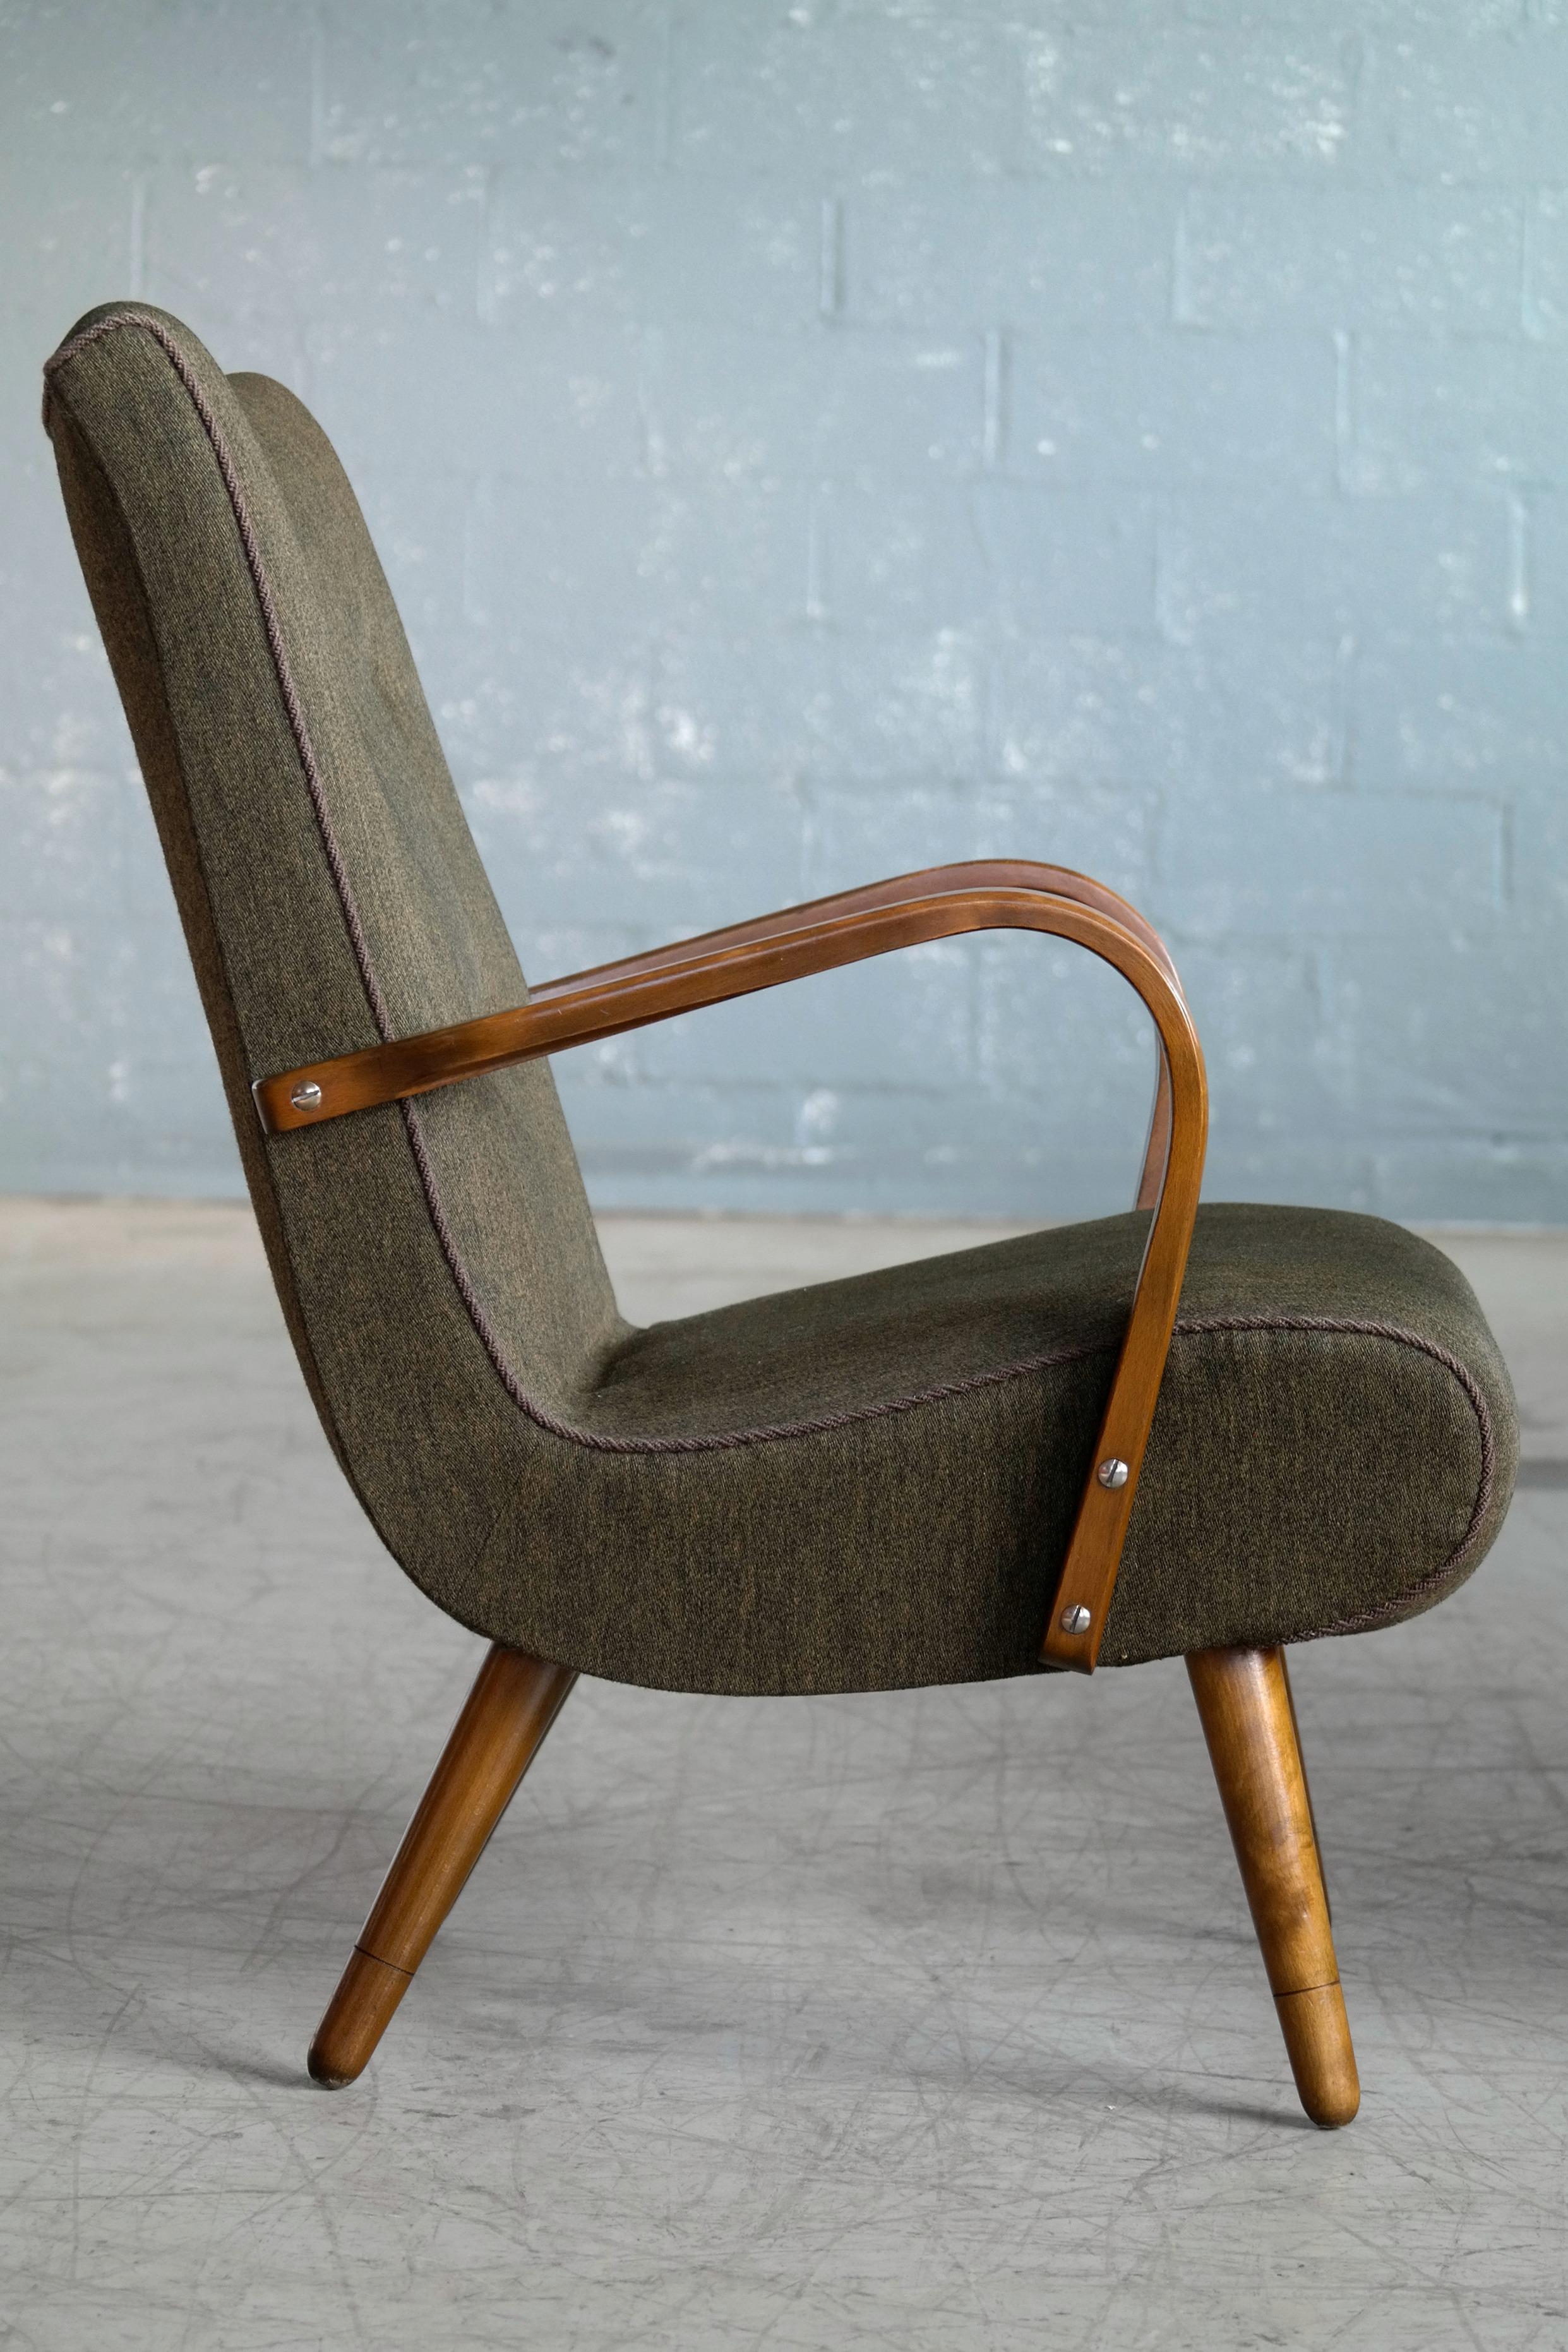 Mid-20th Century Danish Lounge Chair with Open Curved Armrests in the Style of Marco Zanuso